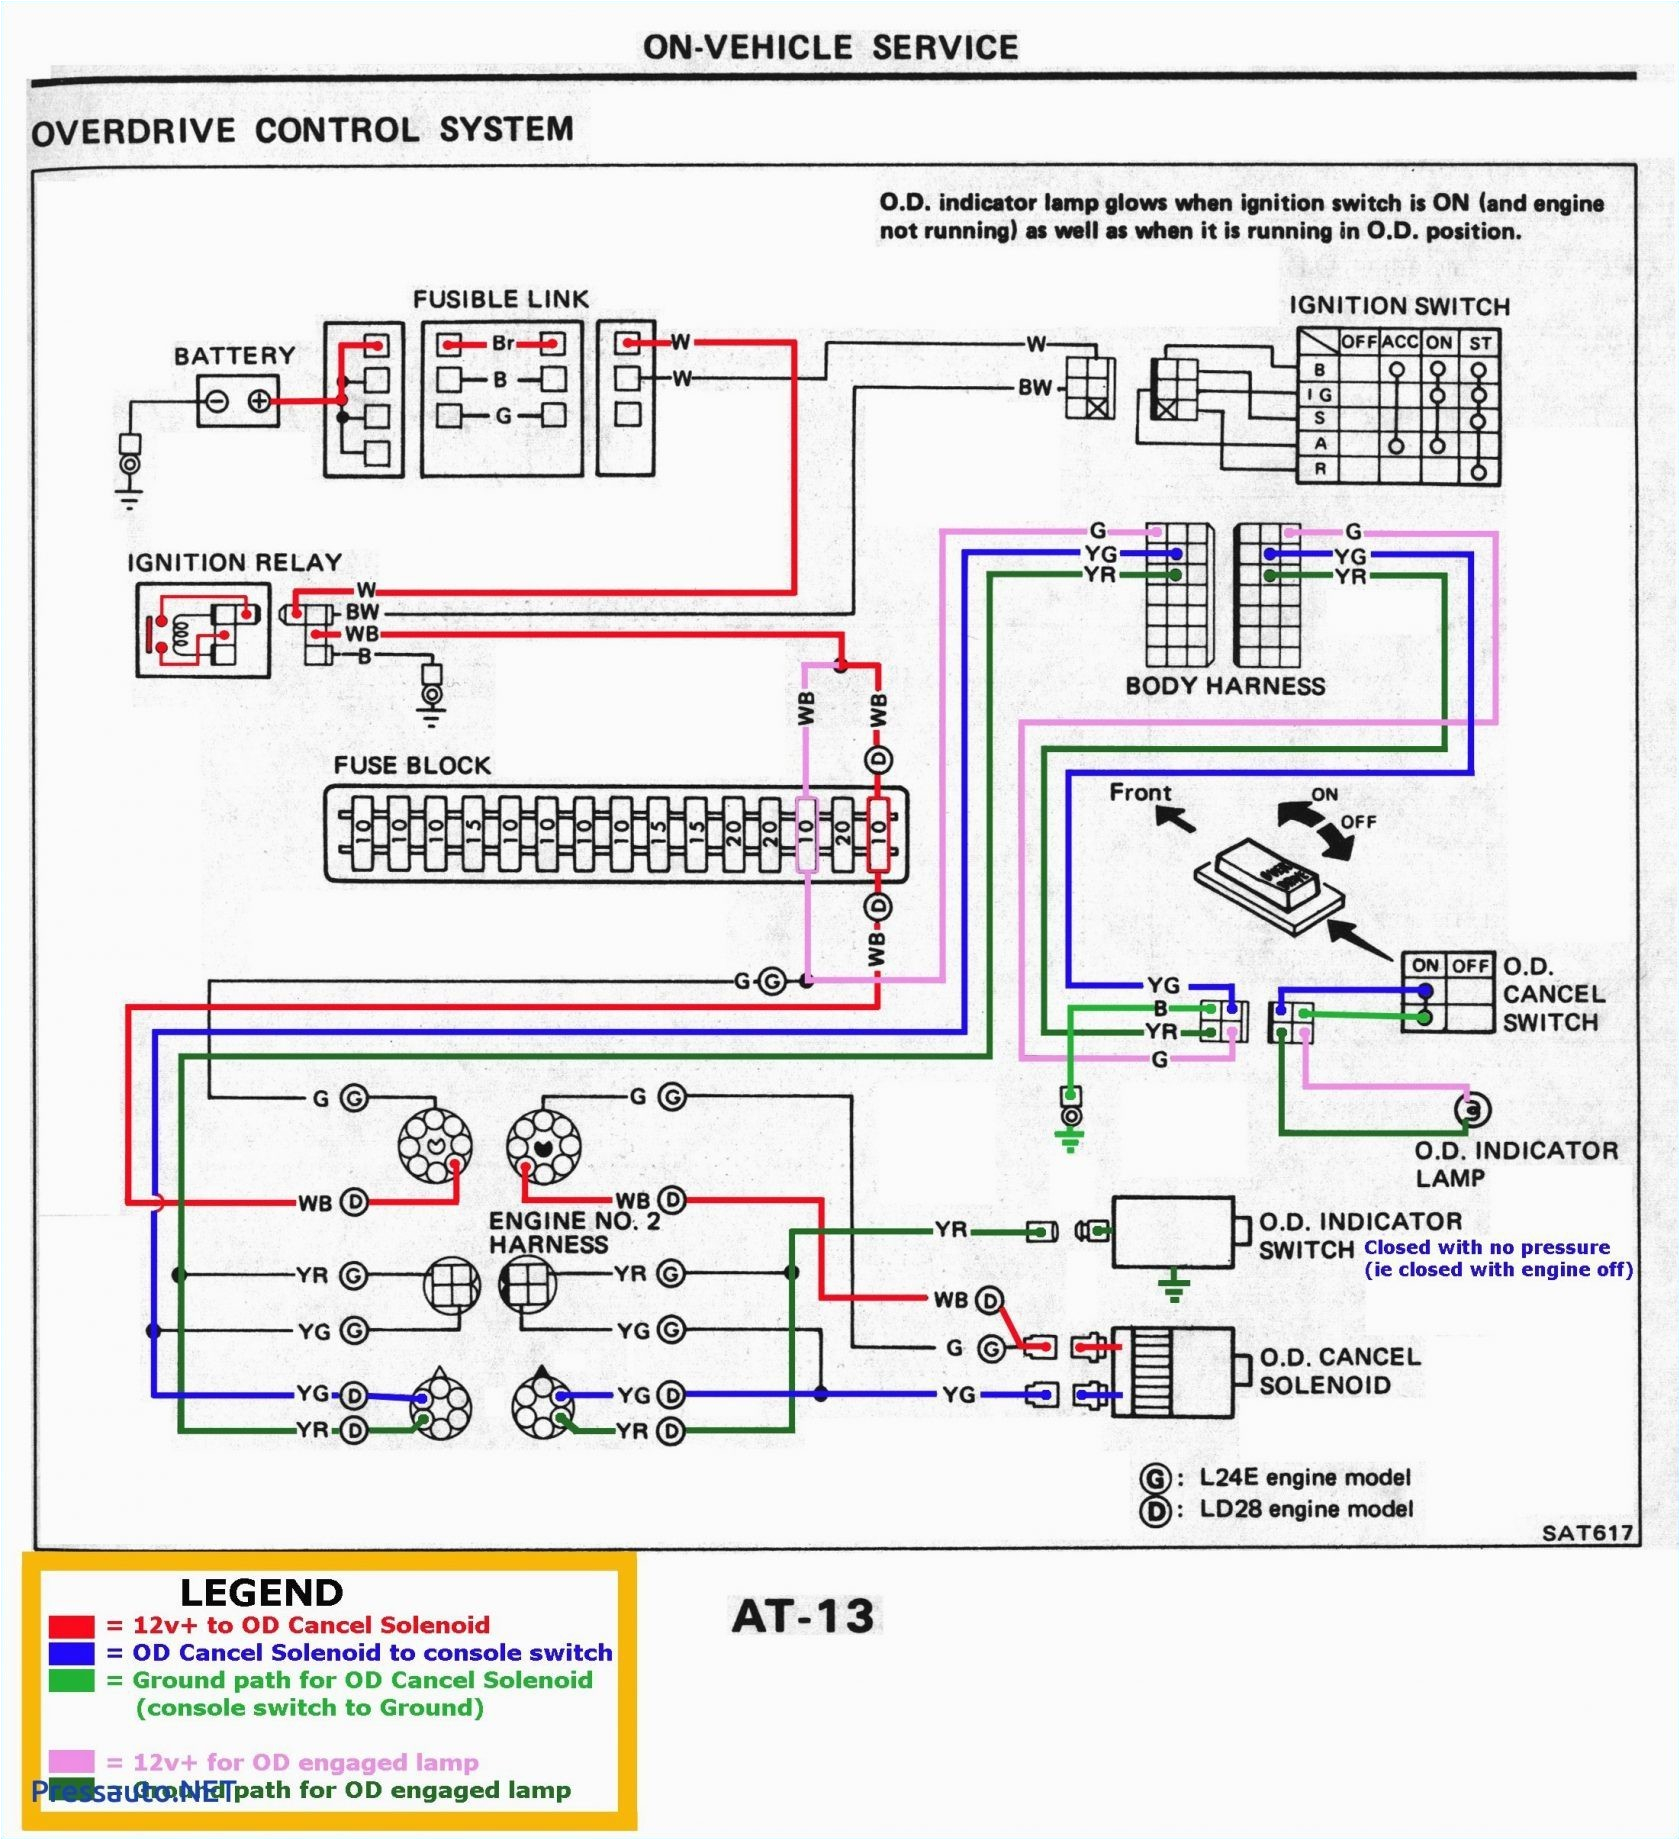 ls1 wire harness diagram wiring diagram experts10 ls1 wiring harness wiring diagram centre ls1 wire harness